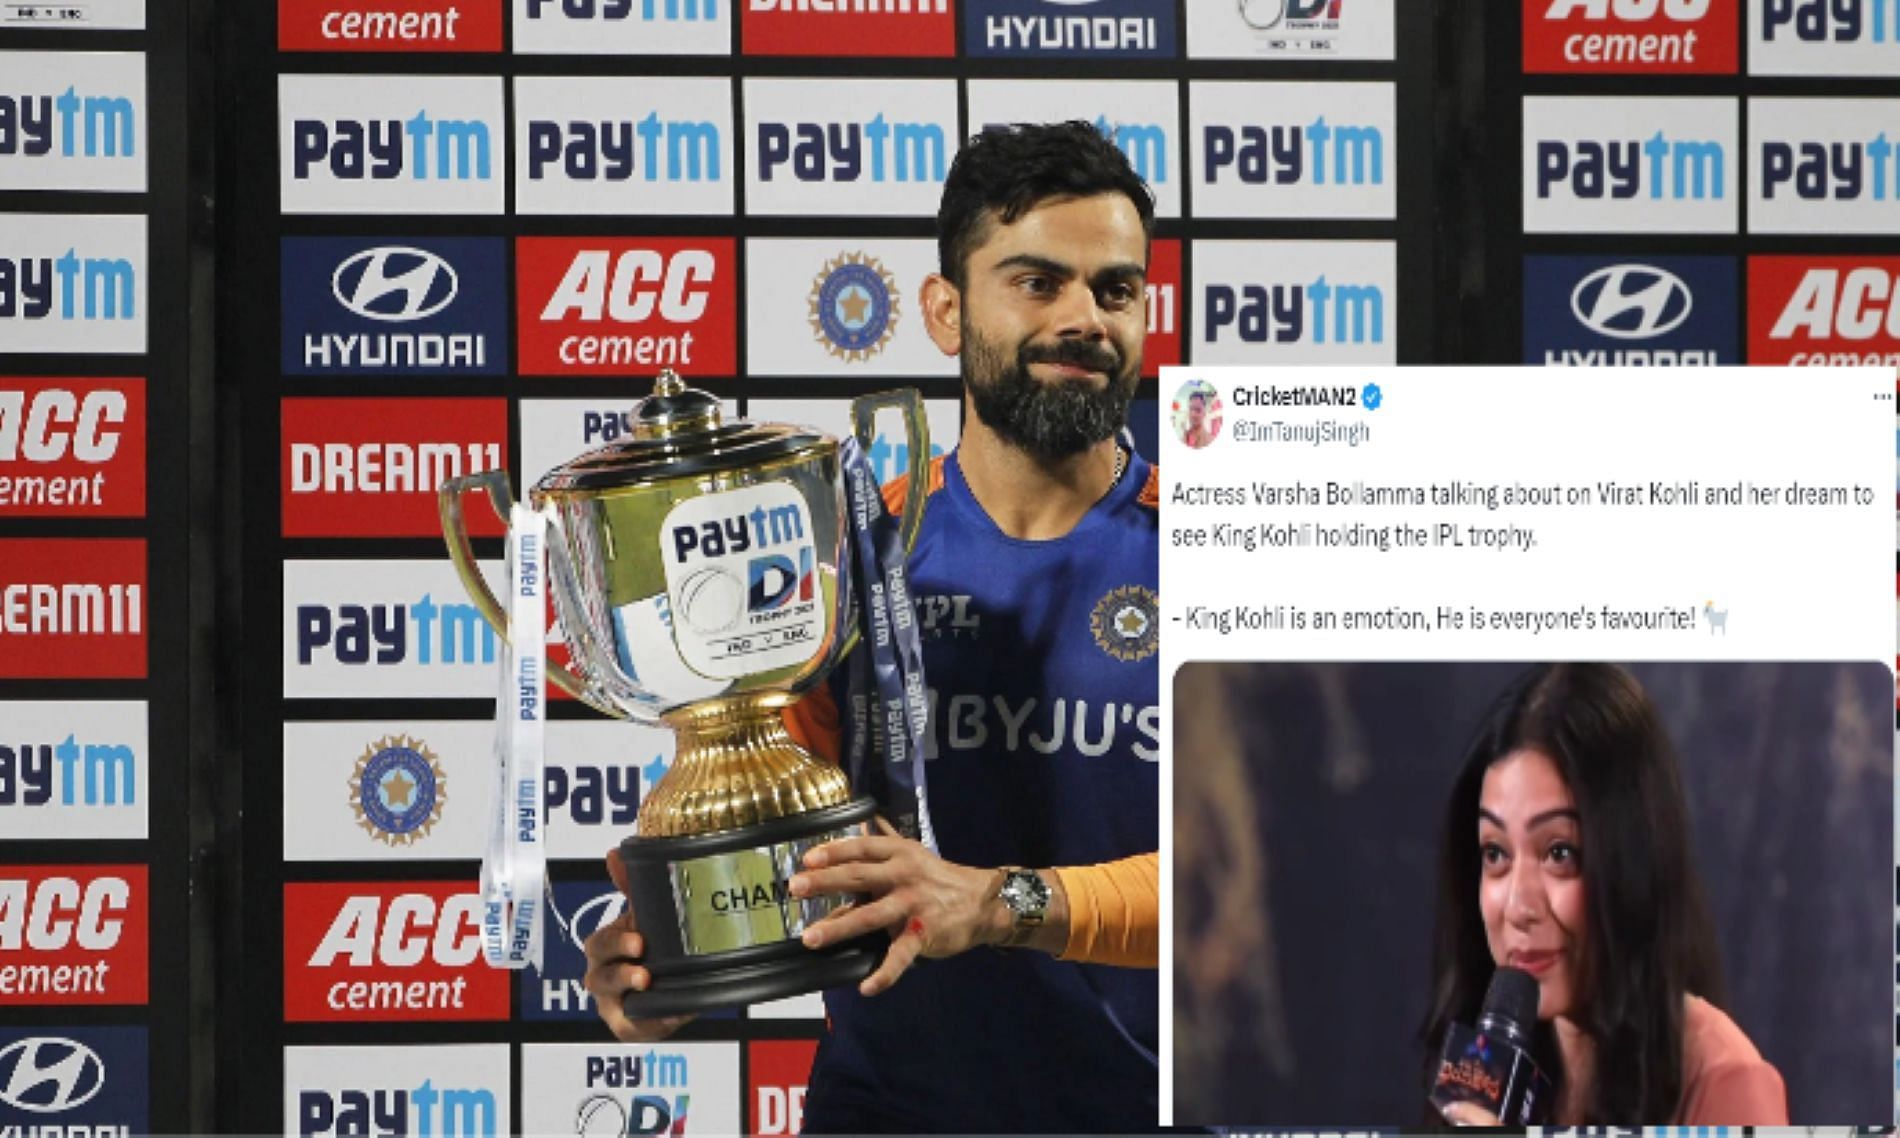 Virat Kohli will look to add the missing IPL trophy to his accomplishments